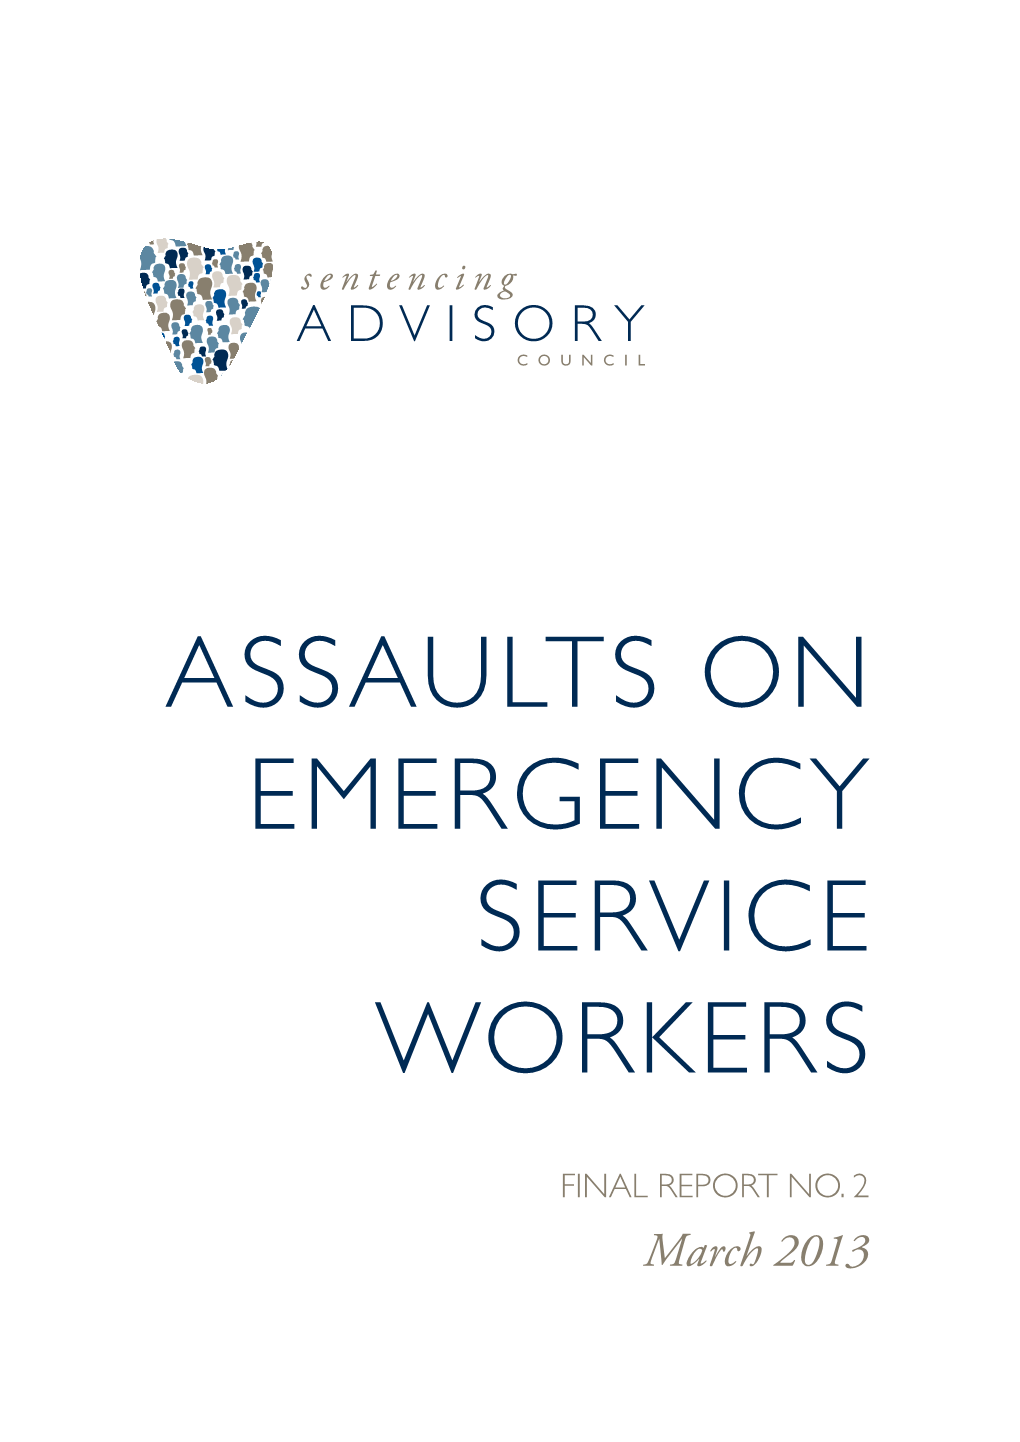 Assaults on Emergency Service Workers Final Report No.2